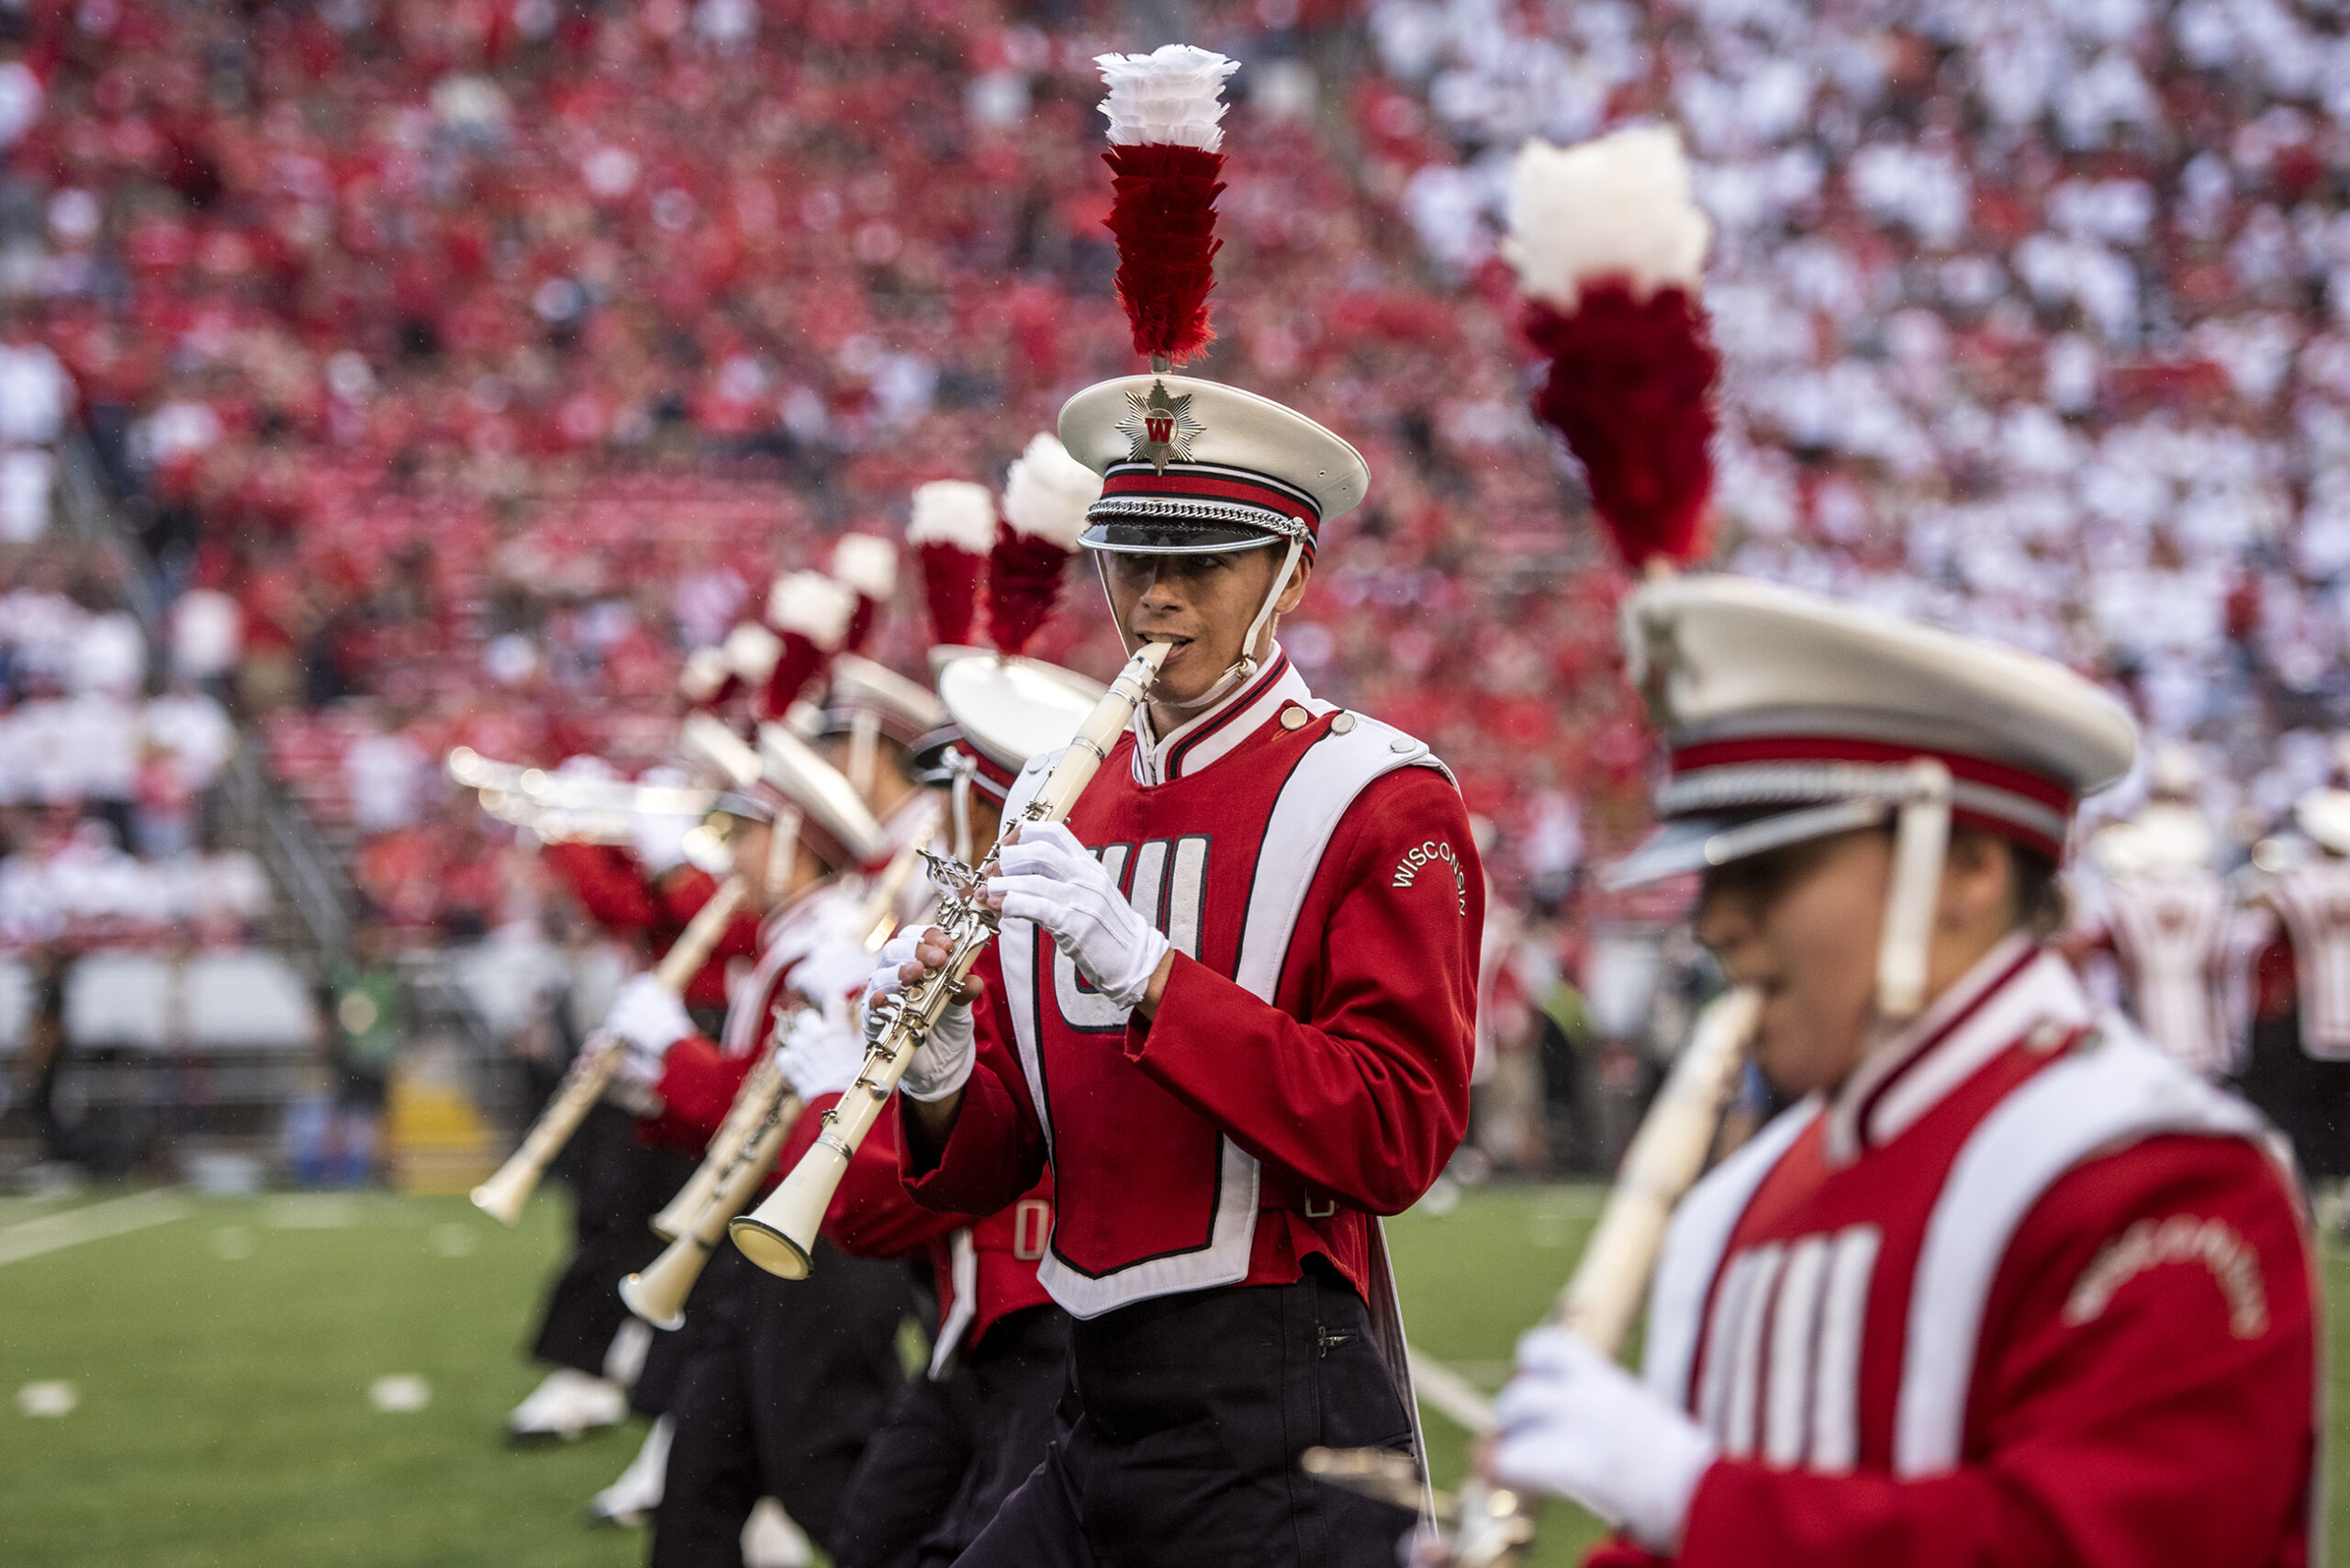 Marching band members form a line across the field while wearing red and white uniforms with plumes.